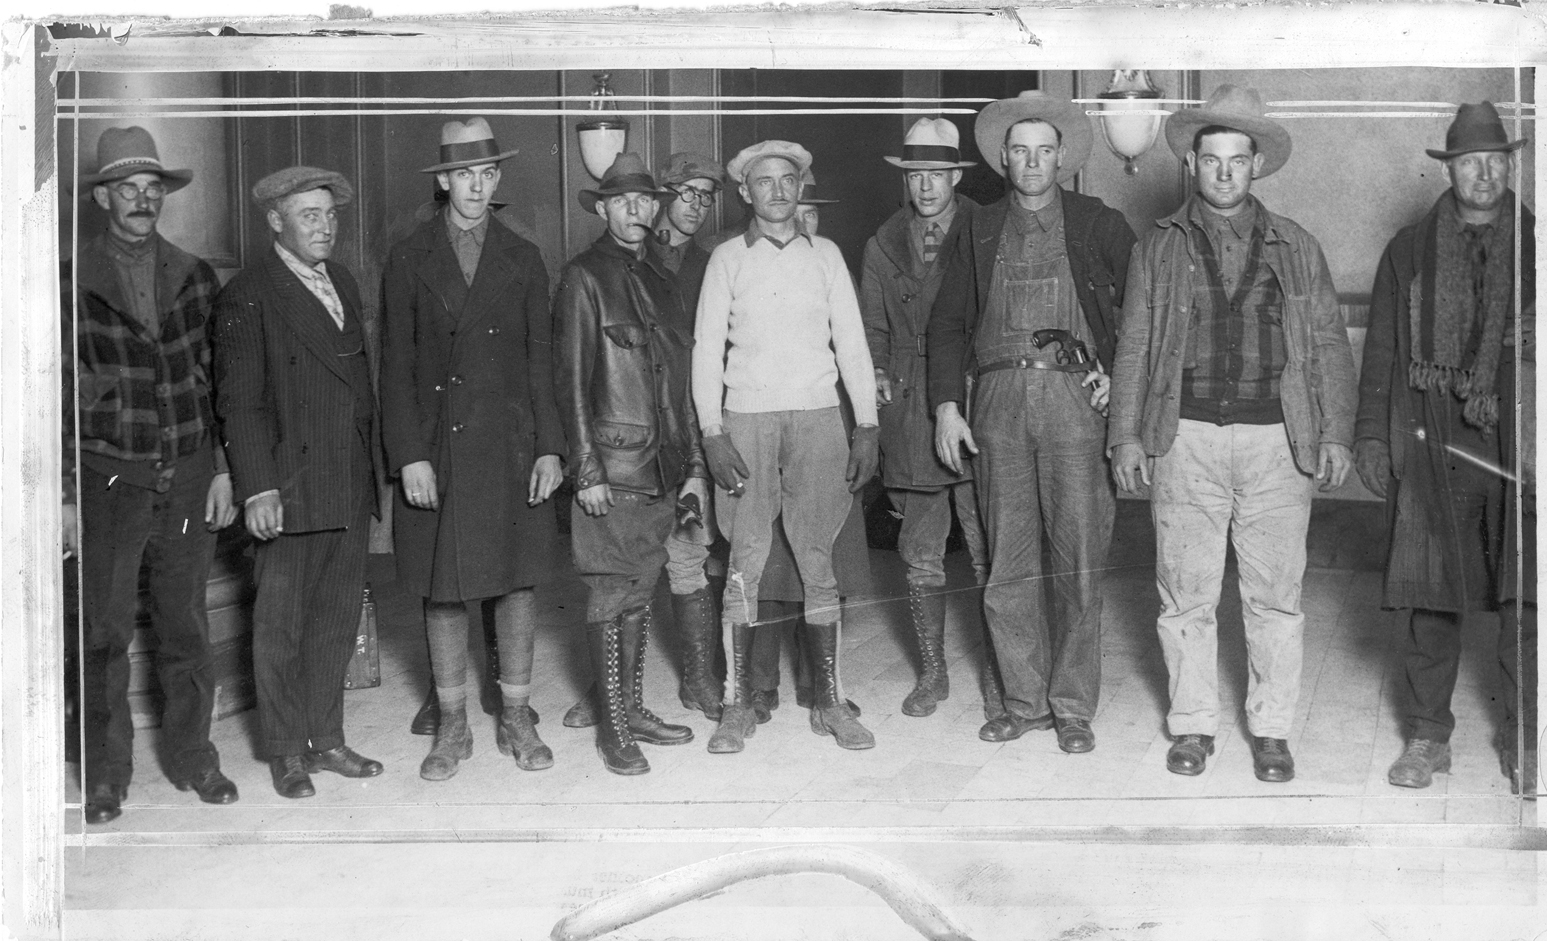 Officers of the state militia prepare to leave for a strike area, November 7, 1927.